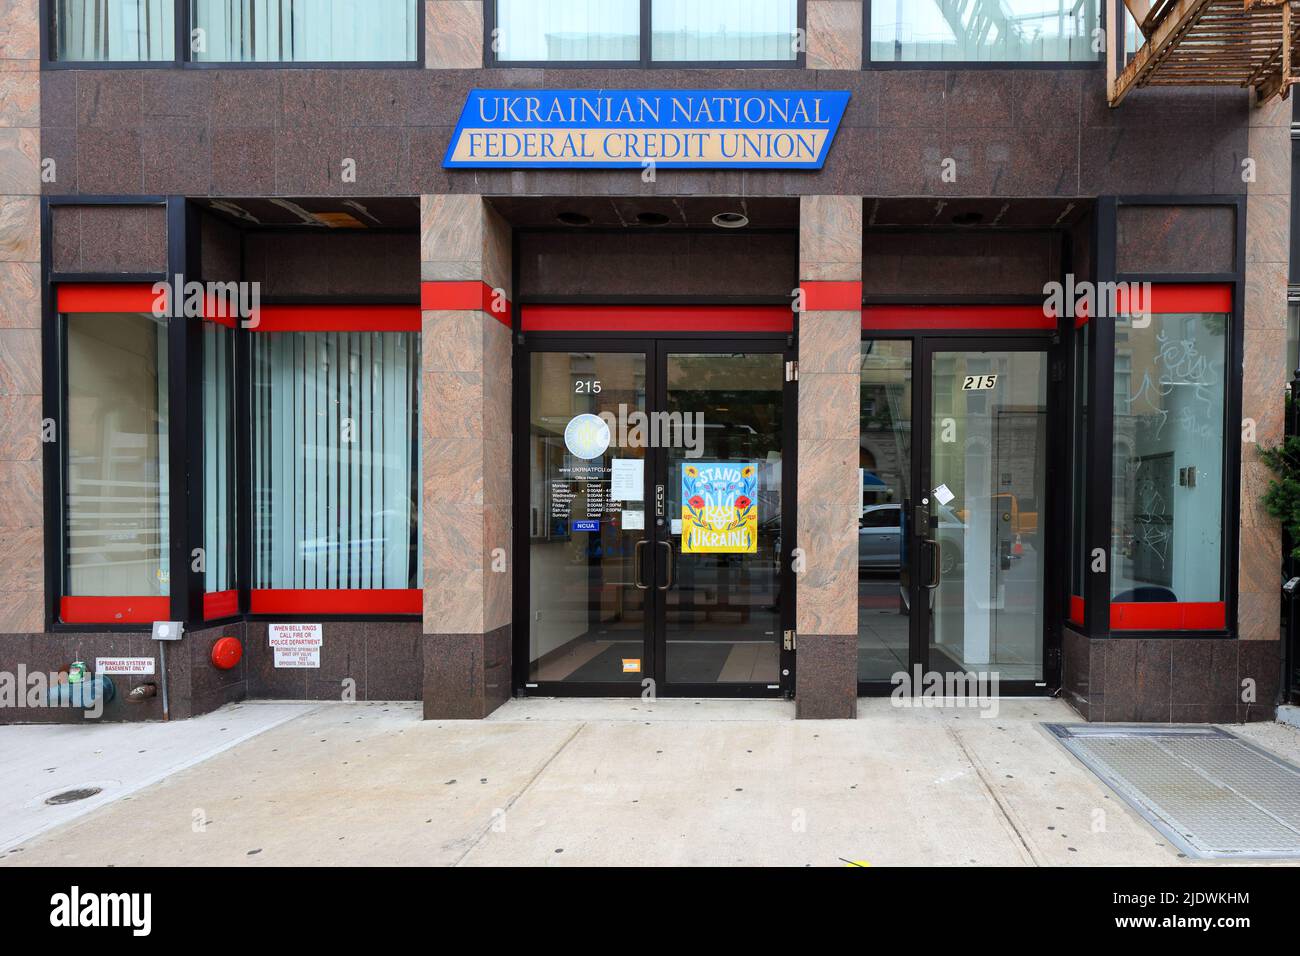 Ukrainian National Federal Credit Union, 215 2nd Ave, New York, NYC storefront photo of a credit union in Manhattan's East Village Stock Photo